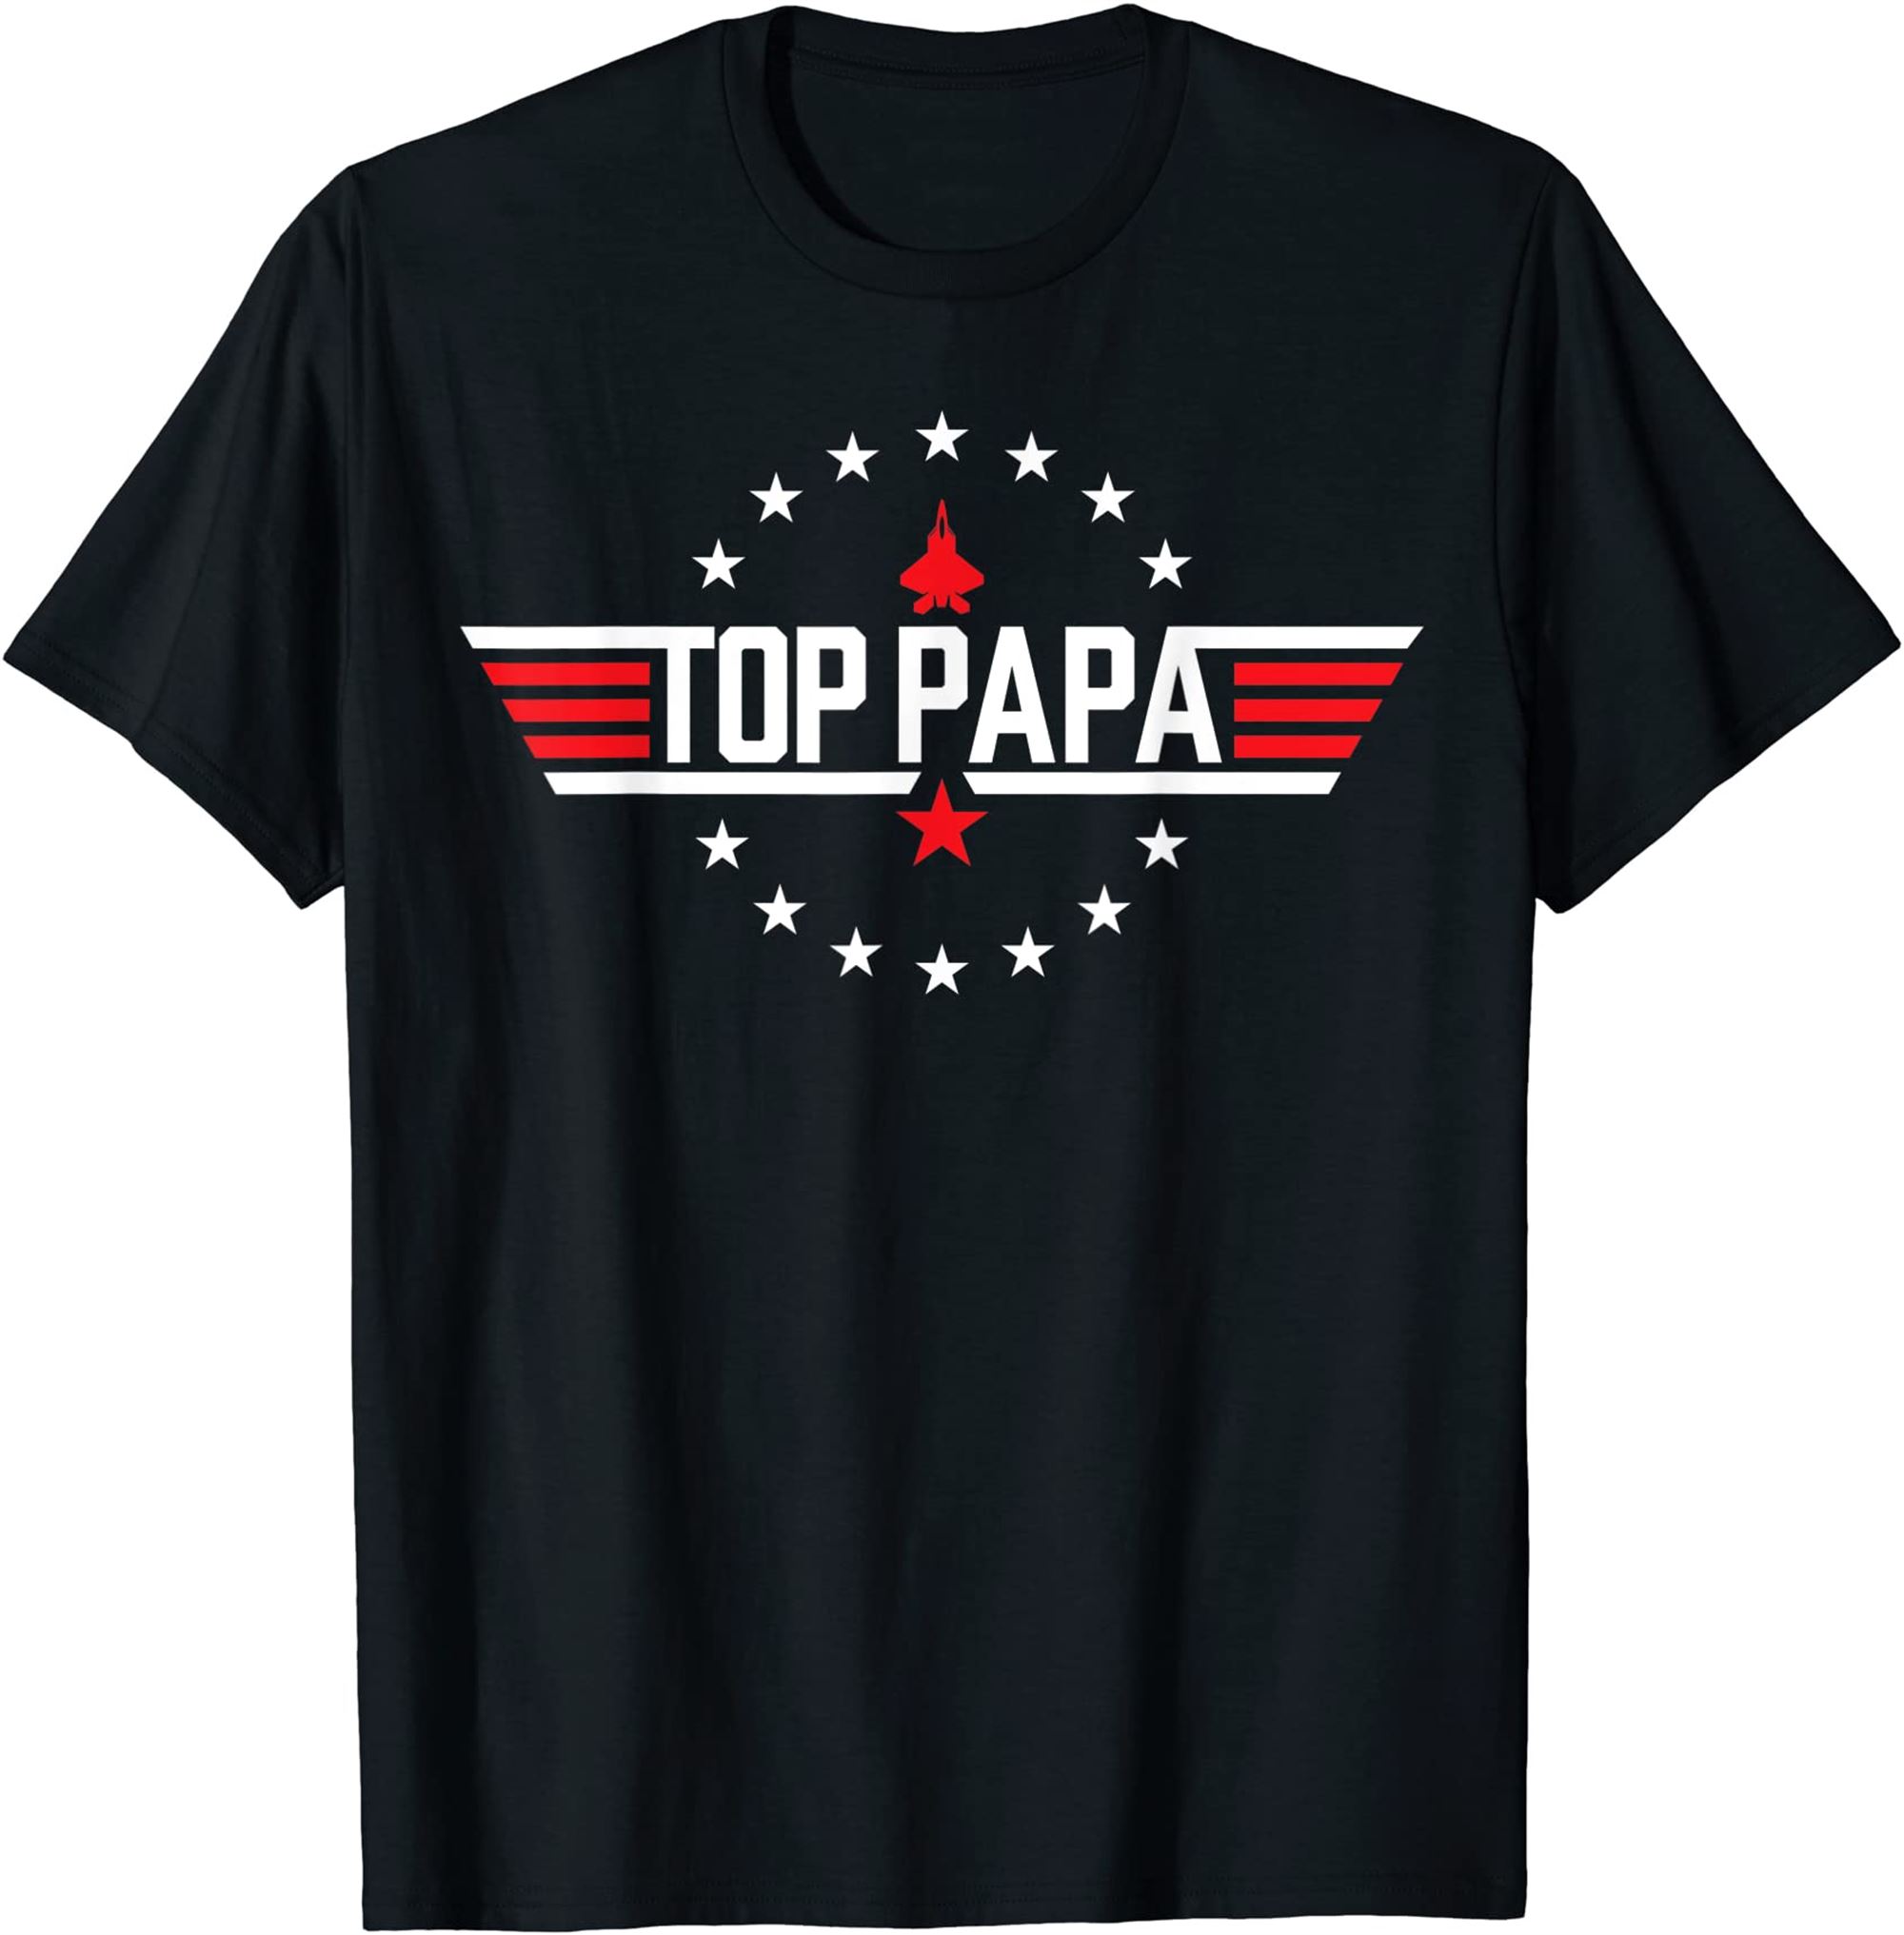 Top Papa Birthday Gun Jet Fathers Day Funny 80s Father Air T-shirt Full Size Up To 5xl